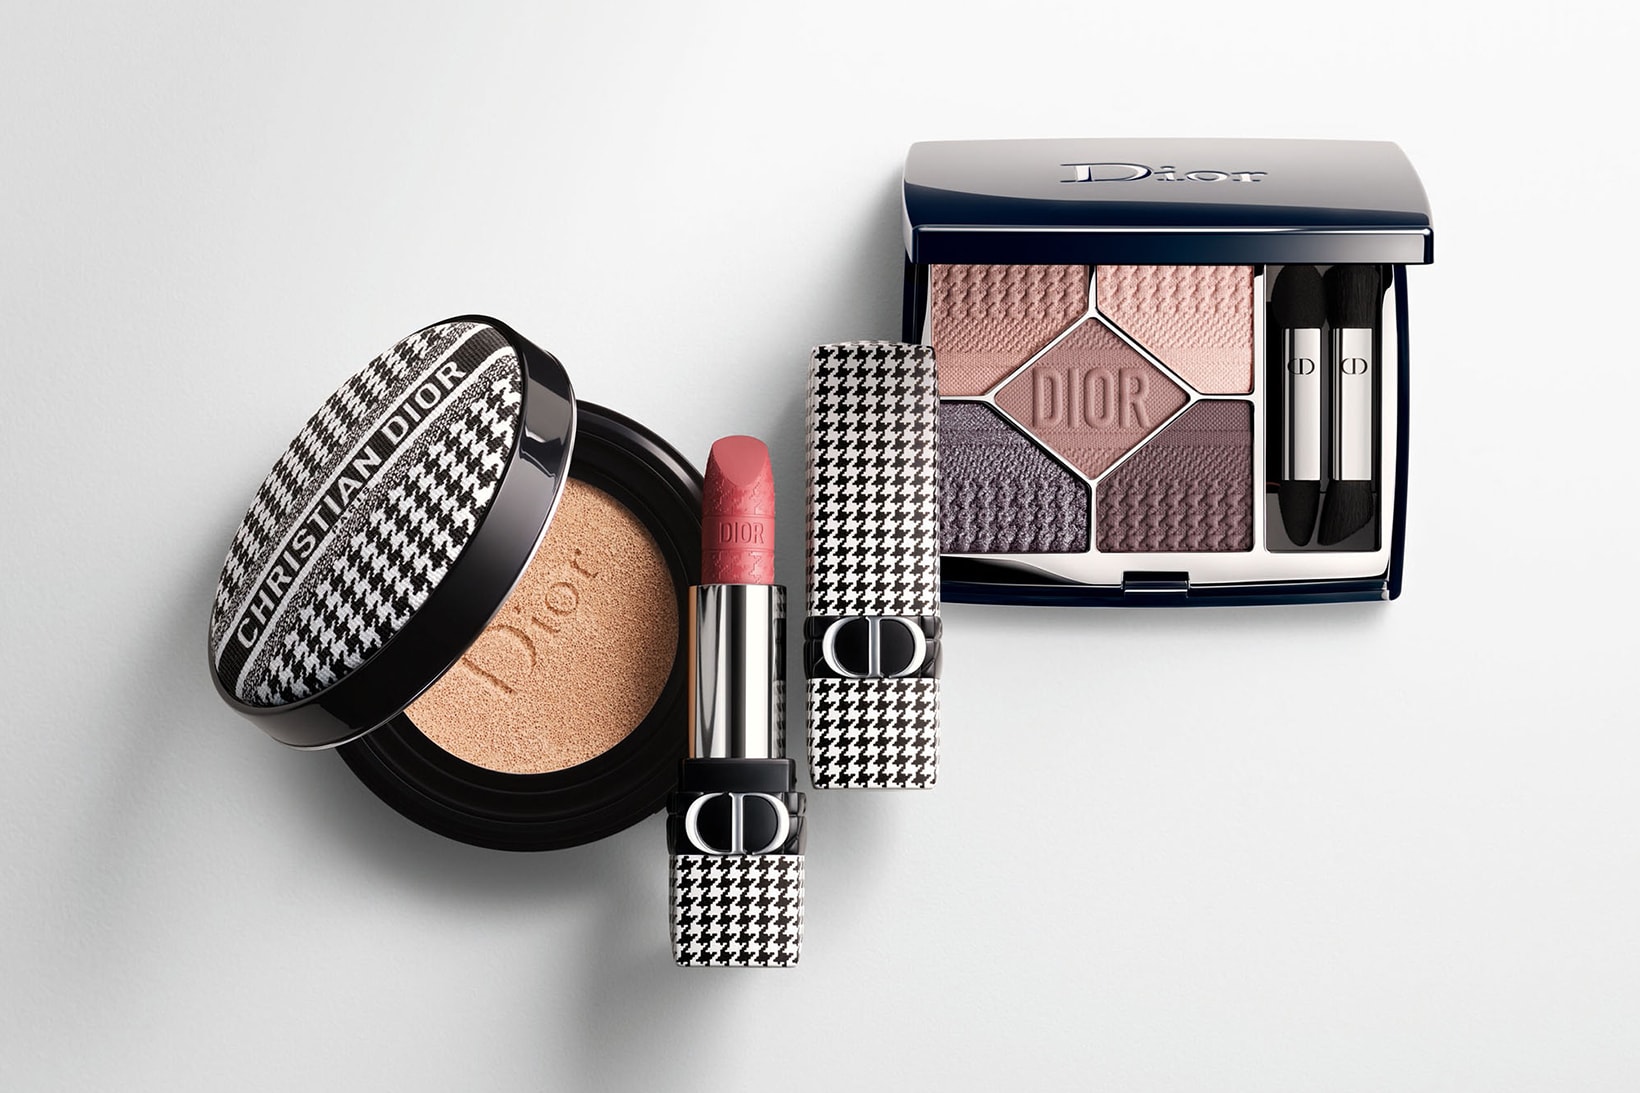 Dior 5 Couleurs Couture New Look Collection Eyeshadow Lipstick Cushion